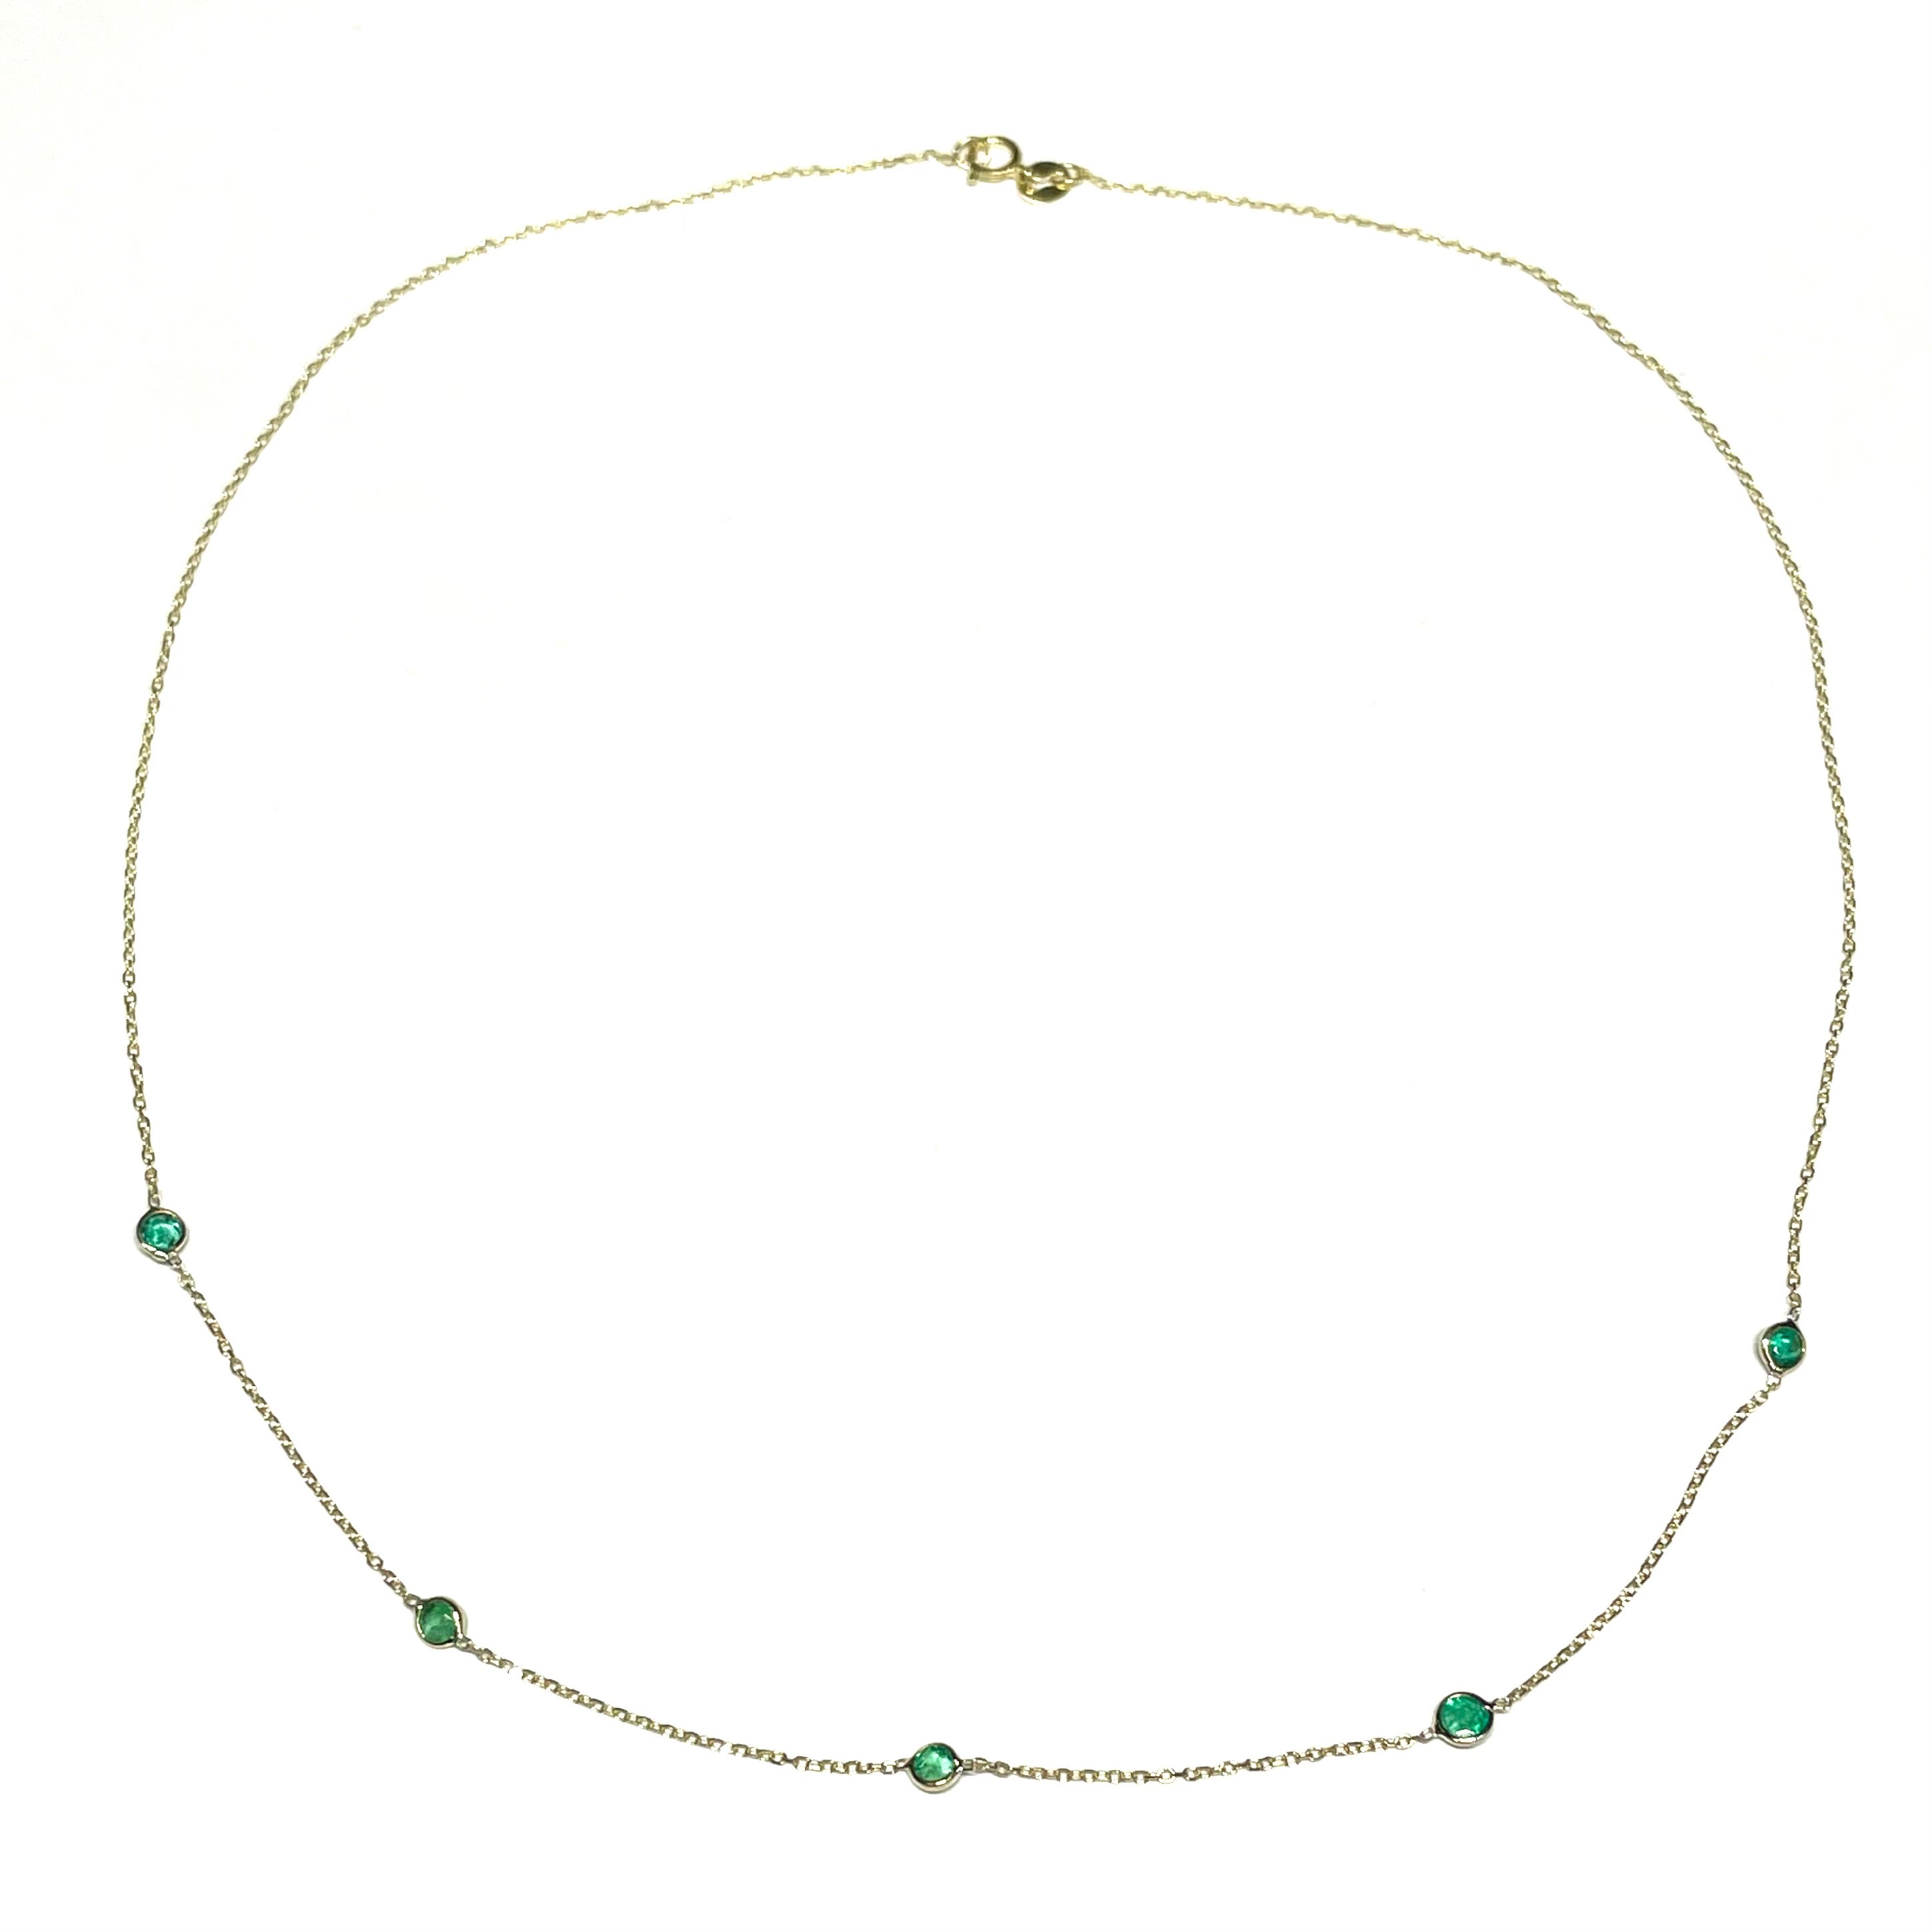 16" 14k Yellow Gold Five Emerald Necklace